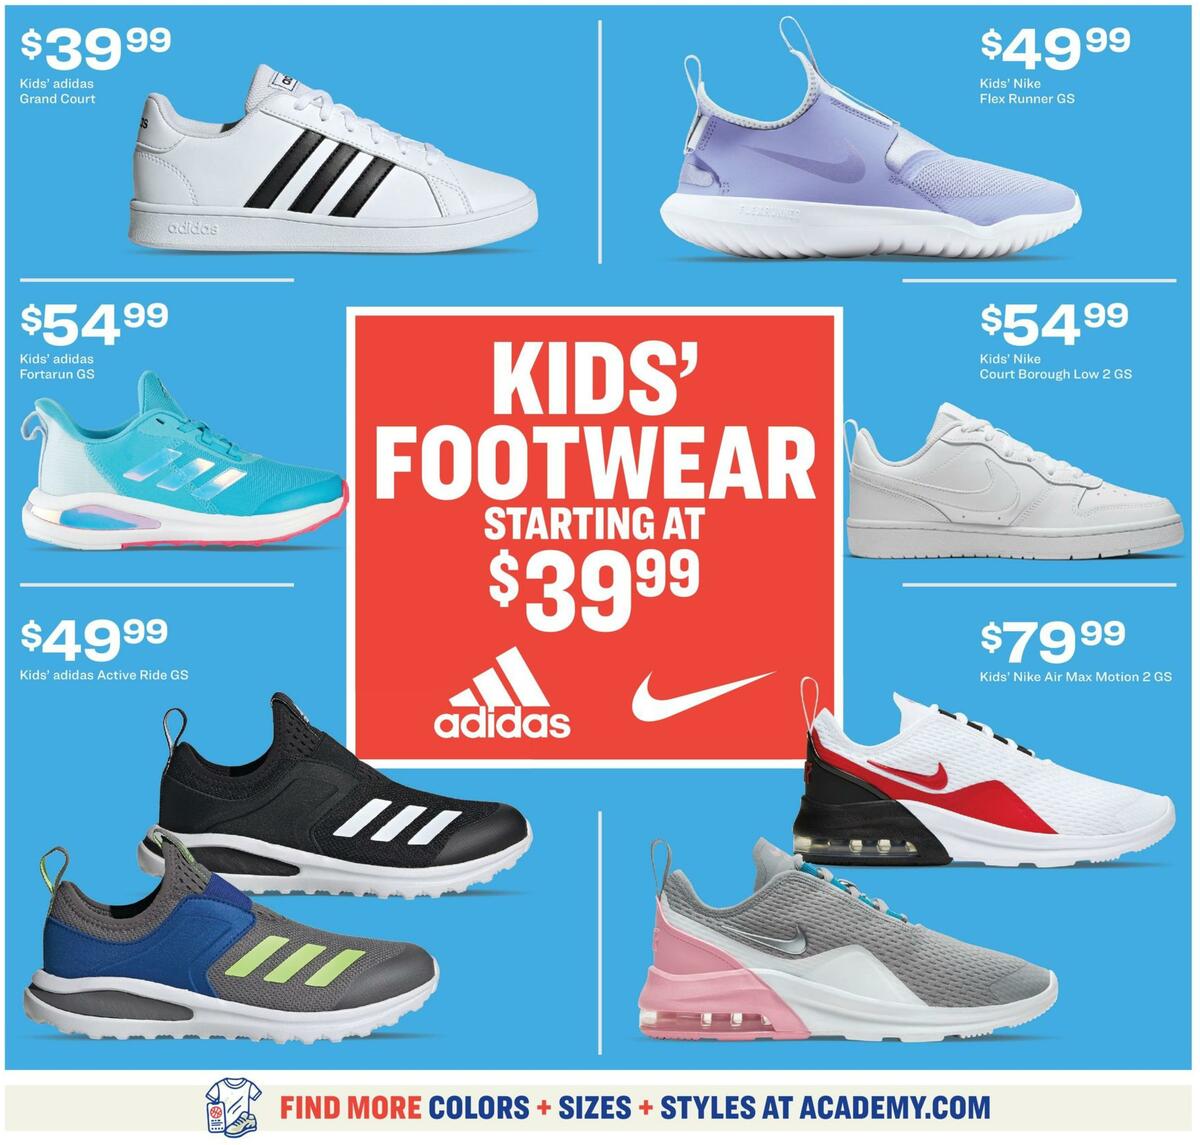 Academy Sports + Outdoors Active Ad Weekly Ad from August 31